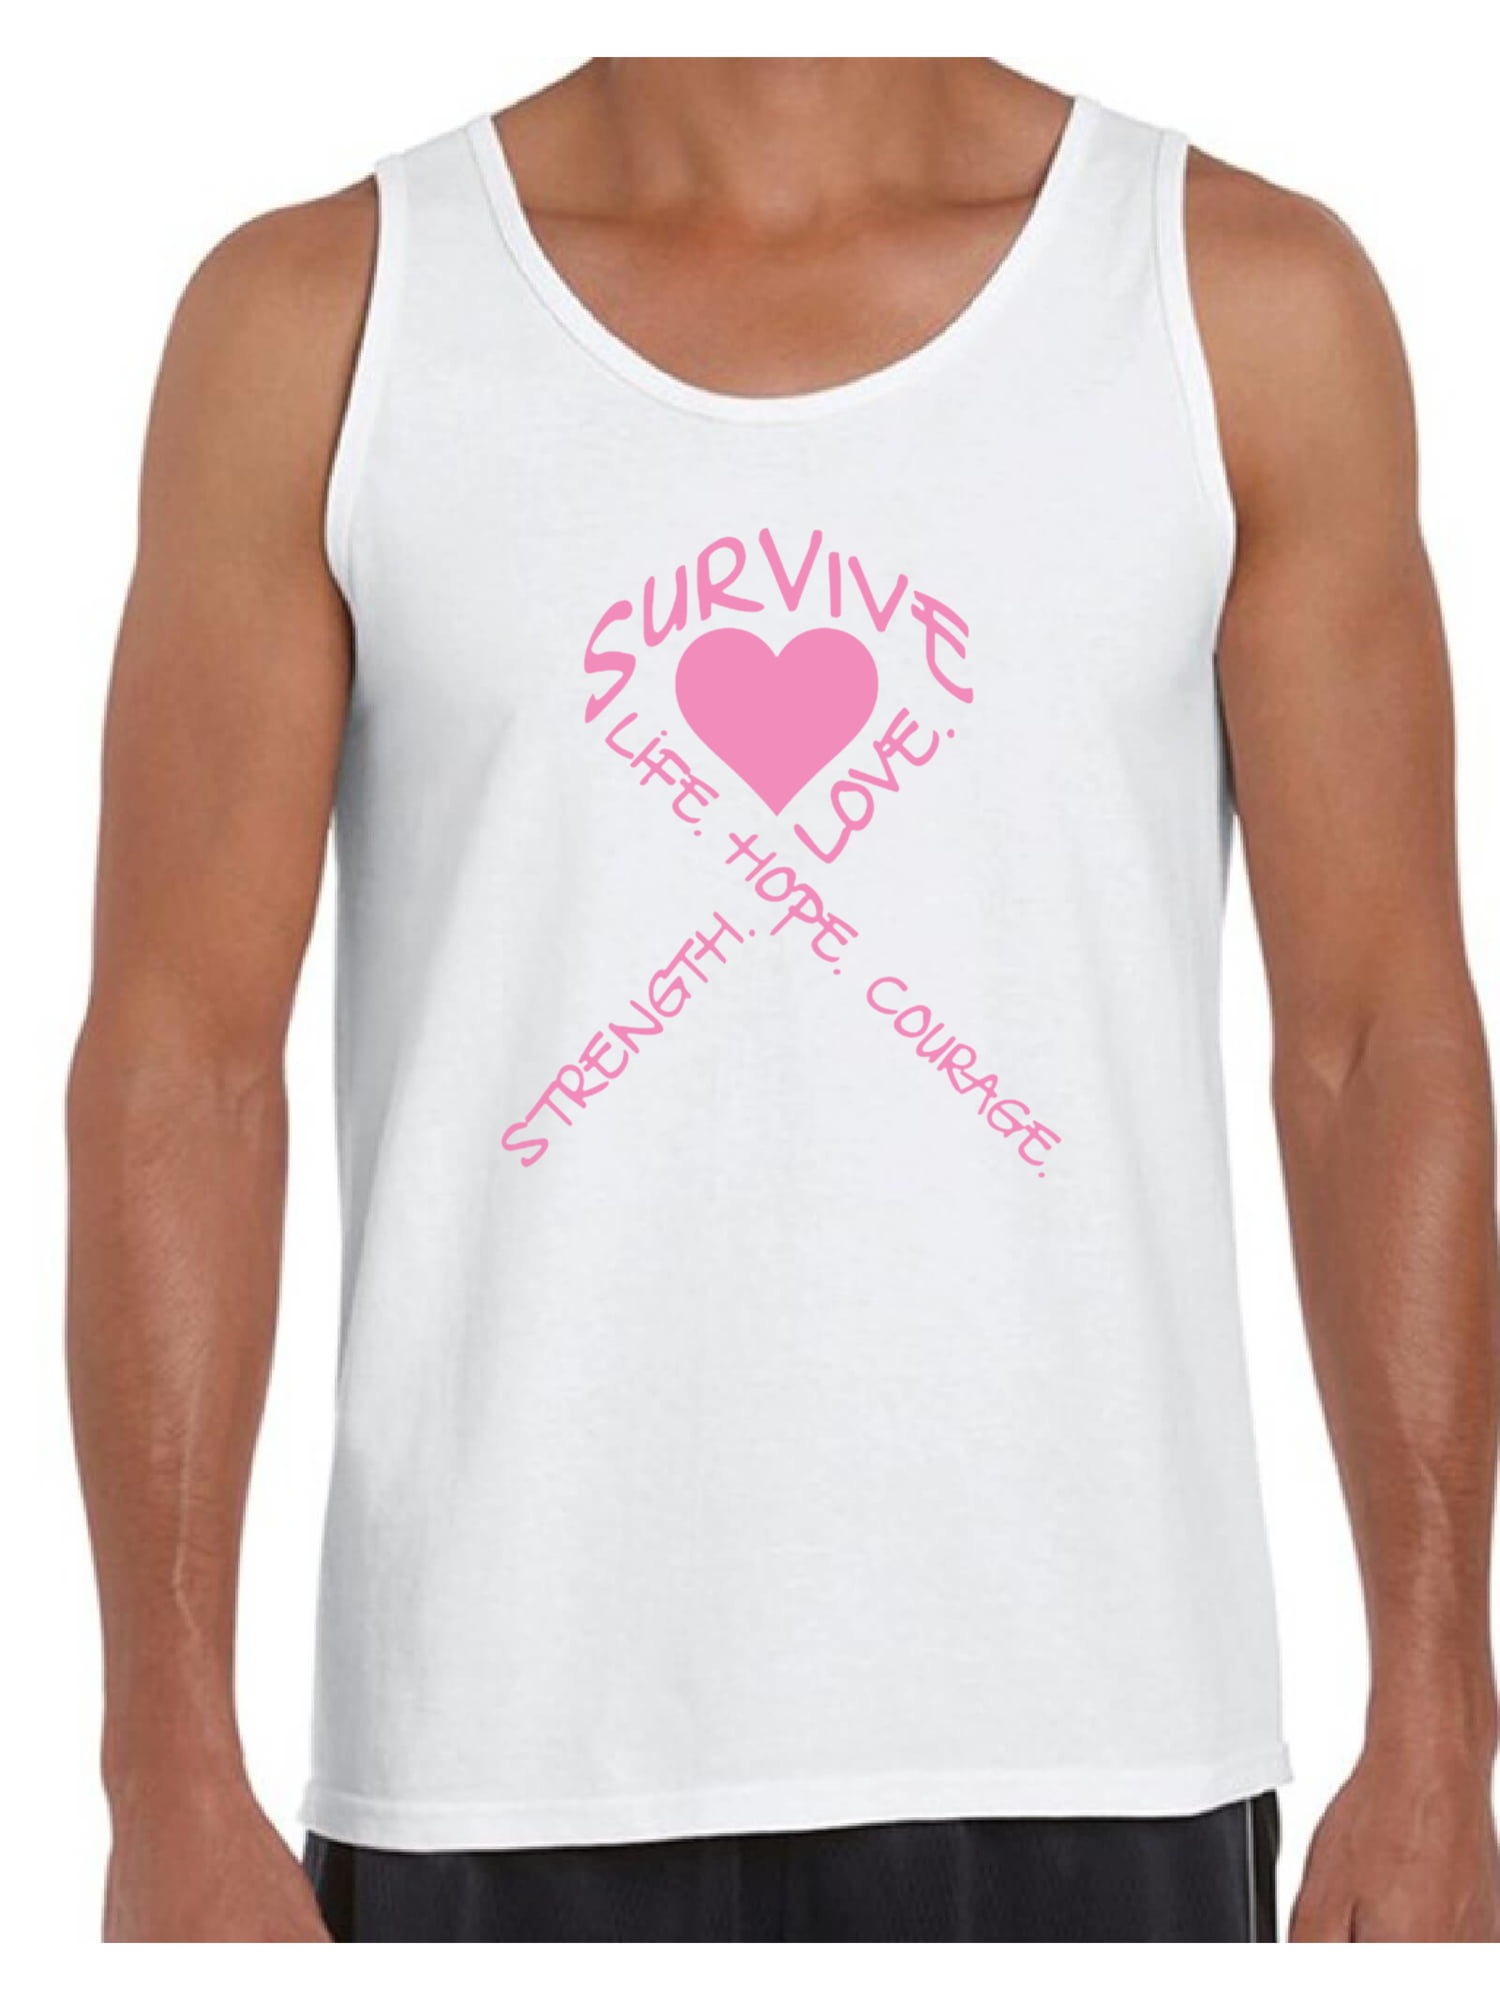 Tee Hunt Fight Cancer Muscle Shirt Pink Strength Support Awareness Family Hope Sleeveless